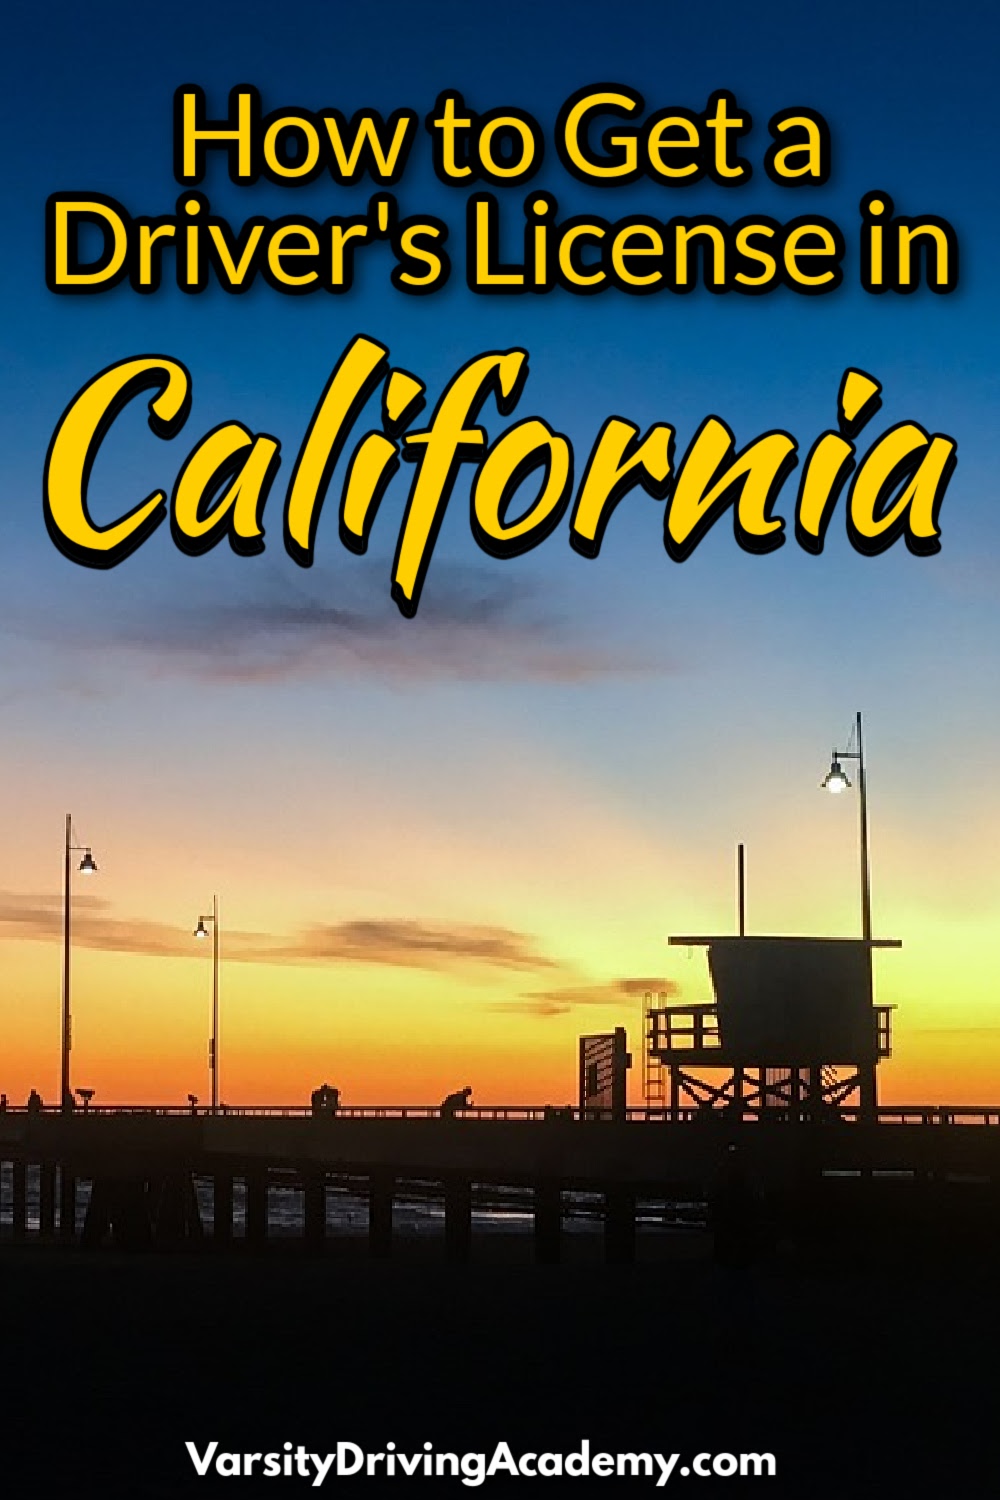 Find out how to get a driving license in California and all the ways Varsity Driving Academy could help make that process easier.